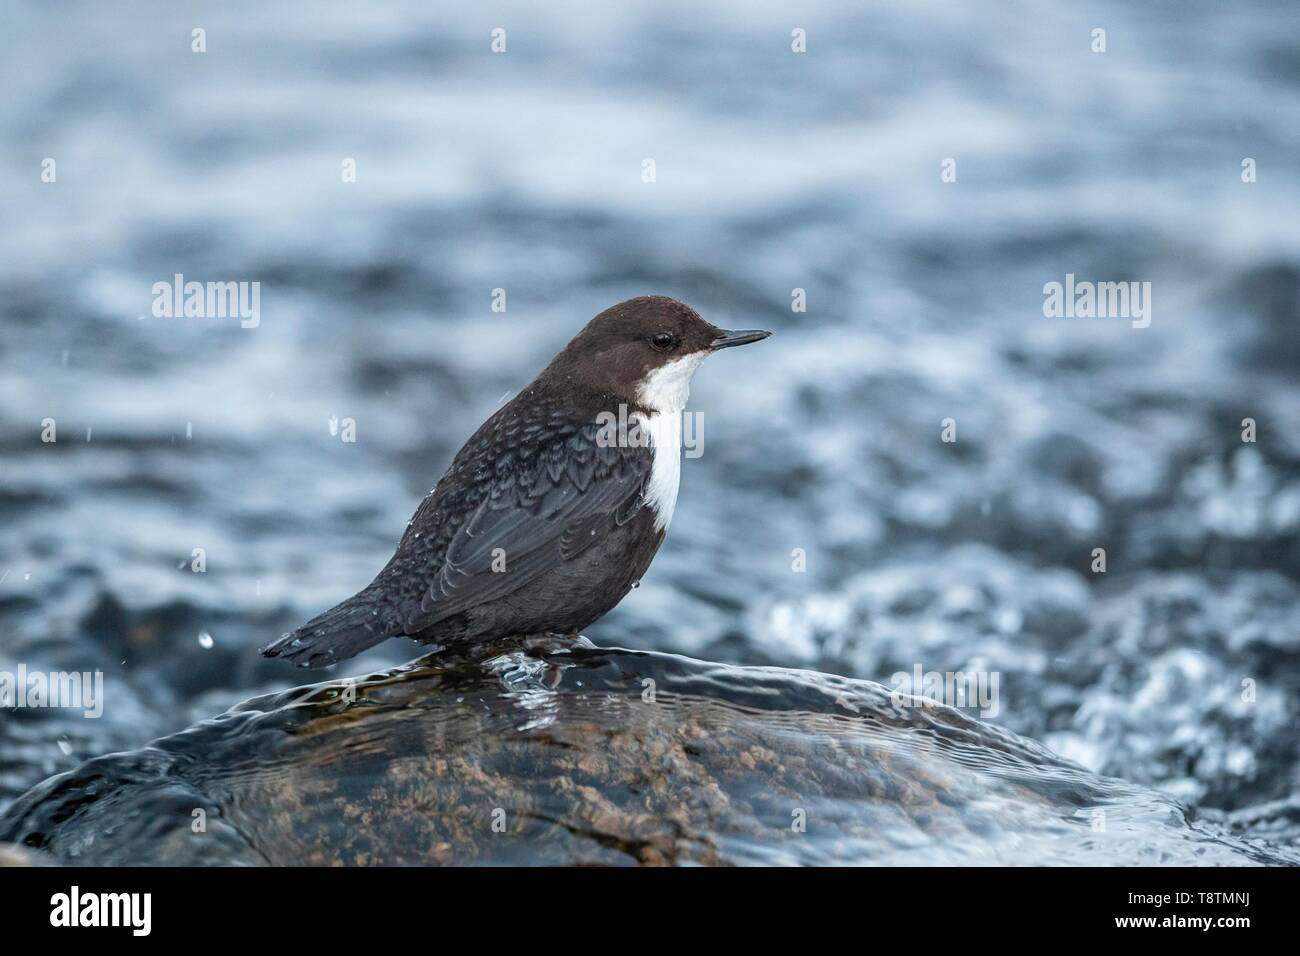 White-throated Dipper (Cinclus cinclus) stands on stone in the river, Lapland, Finland Stock Photo